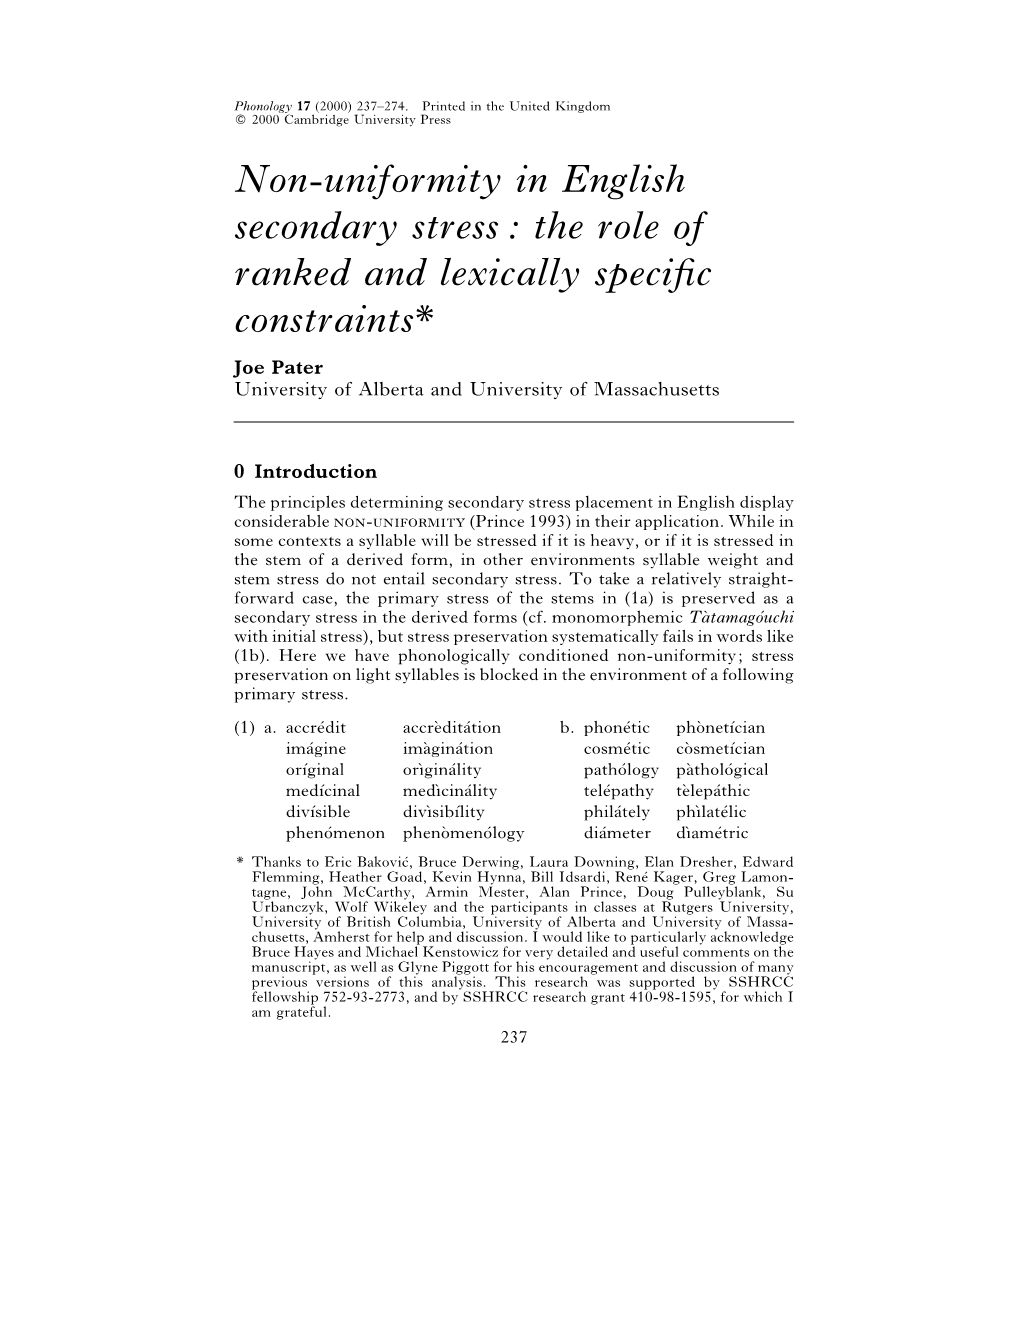 Non-Uniformity in English Secondary Stress: the Role of Ranked and Lexically Speciﬁc Constraints* Joe Pater University of Alberta and University of Massachusetts